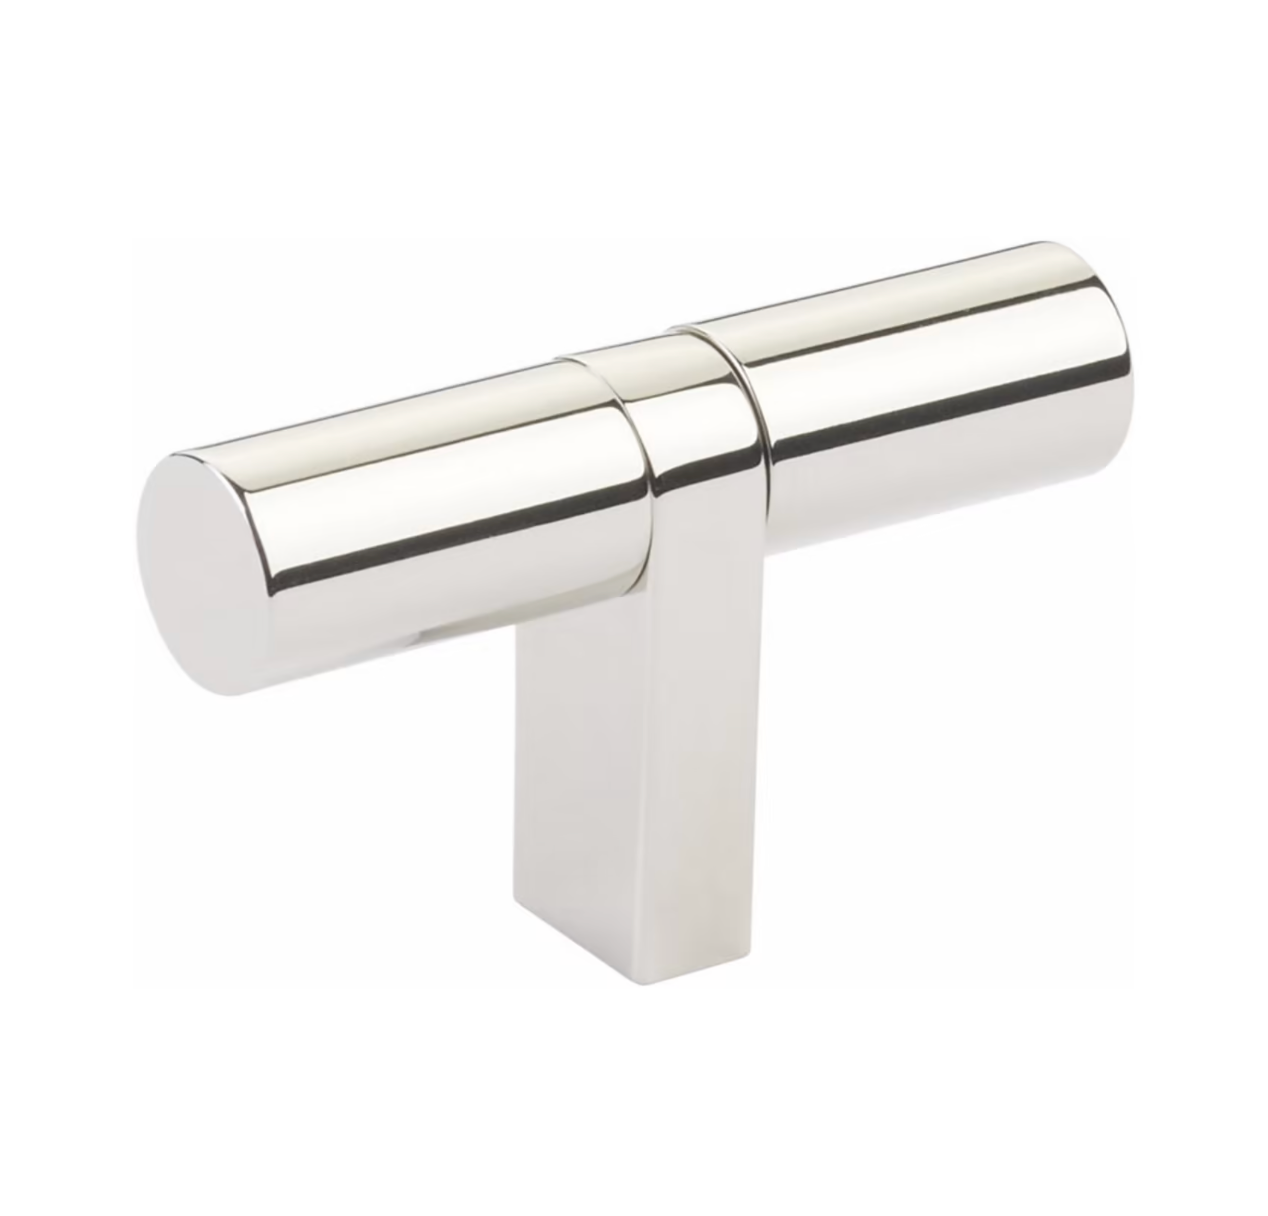 Smooth "Converse No.2" Polished Nickel Cabinet Knobs and Drawer Pulls - Industry Hardware